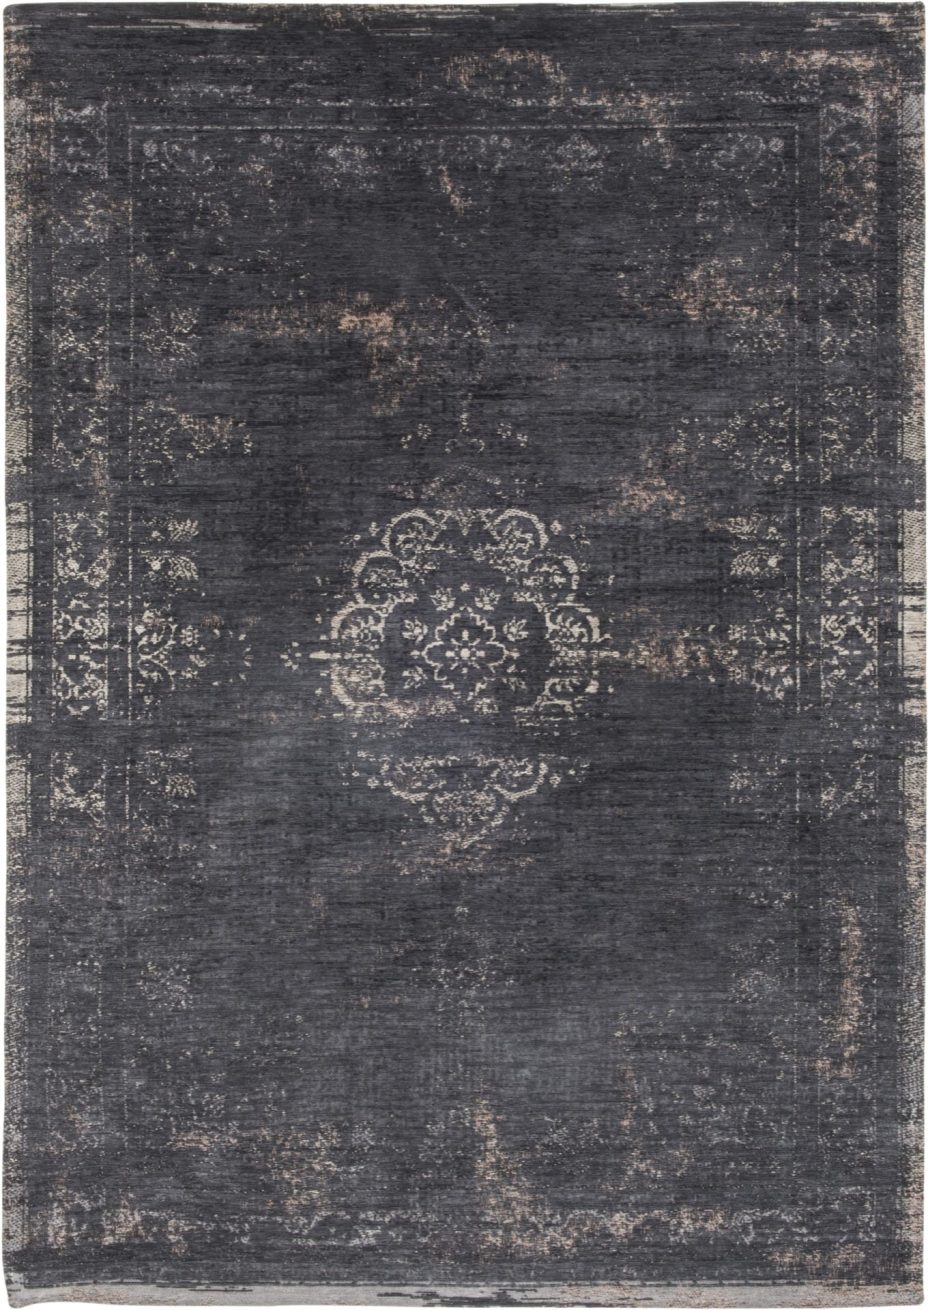 Fading World Collection Medallion Mineral Black 8263 rug by Louis De Poortere